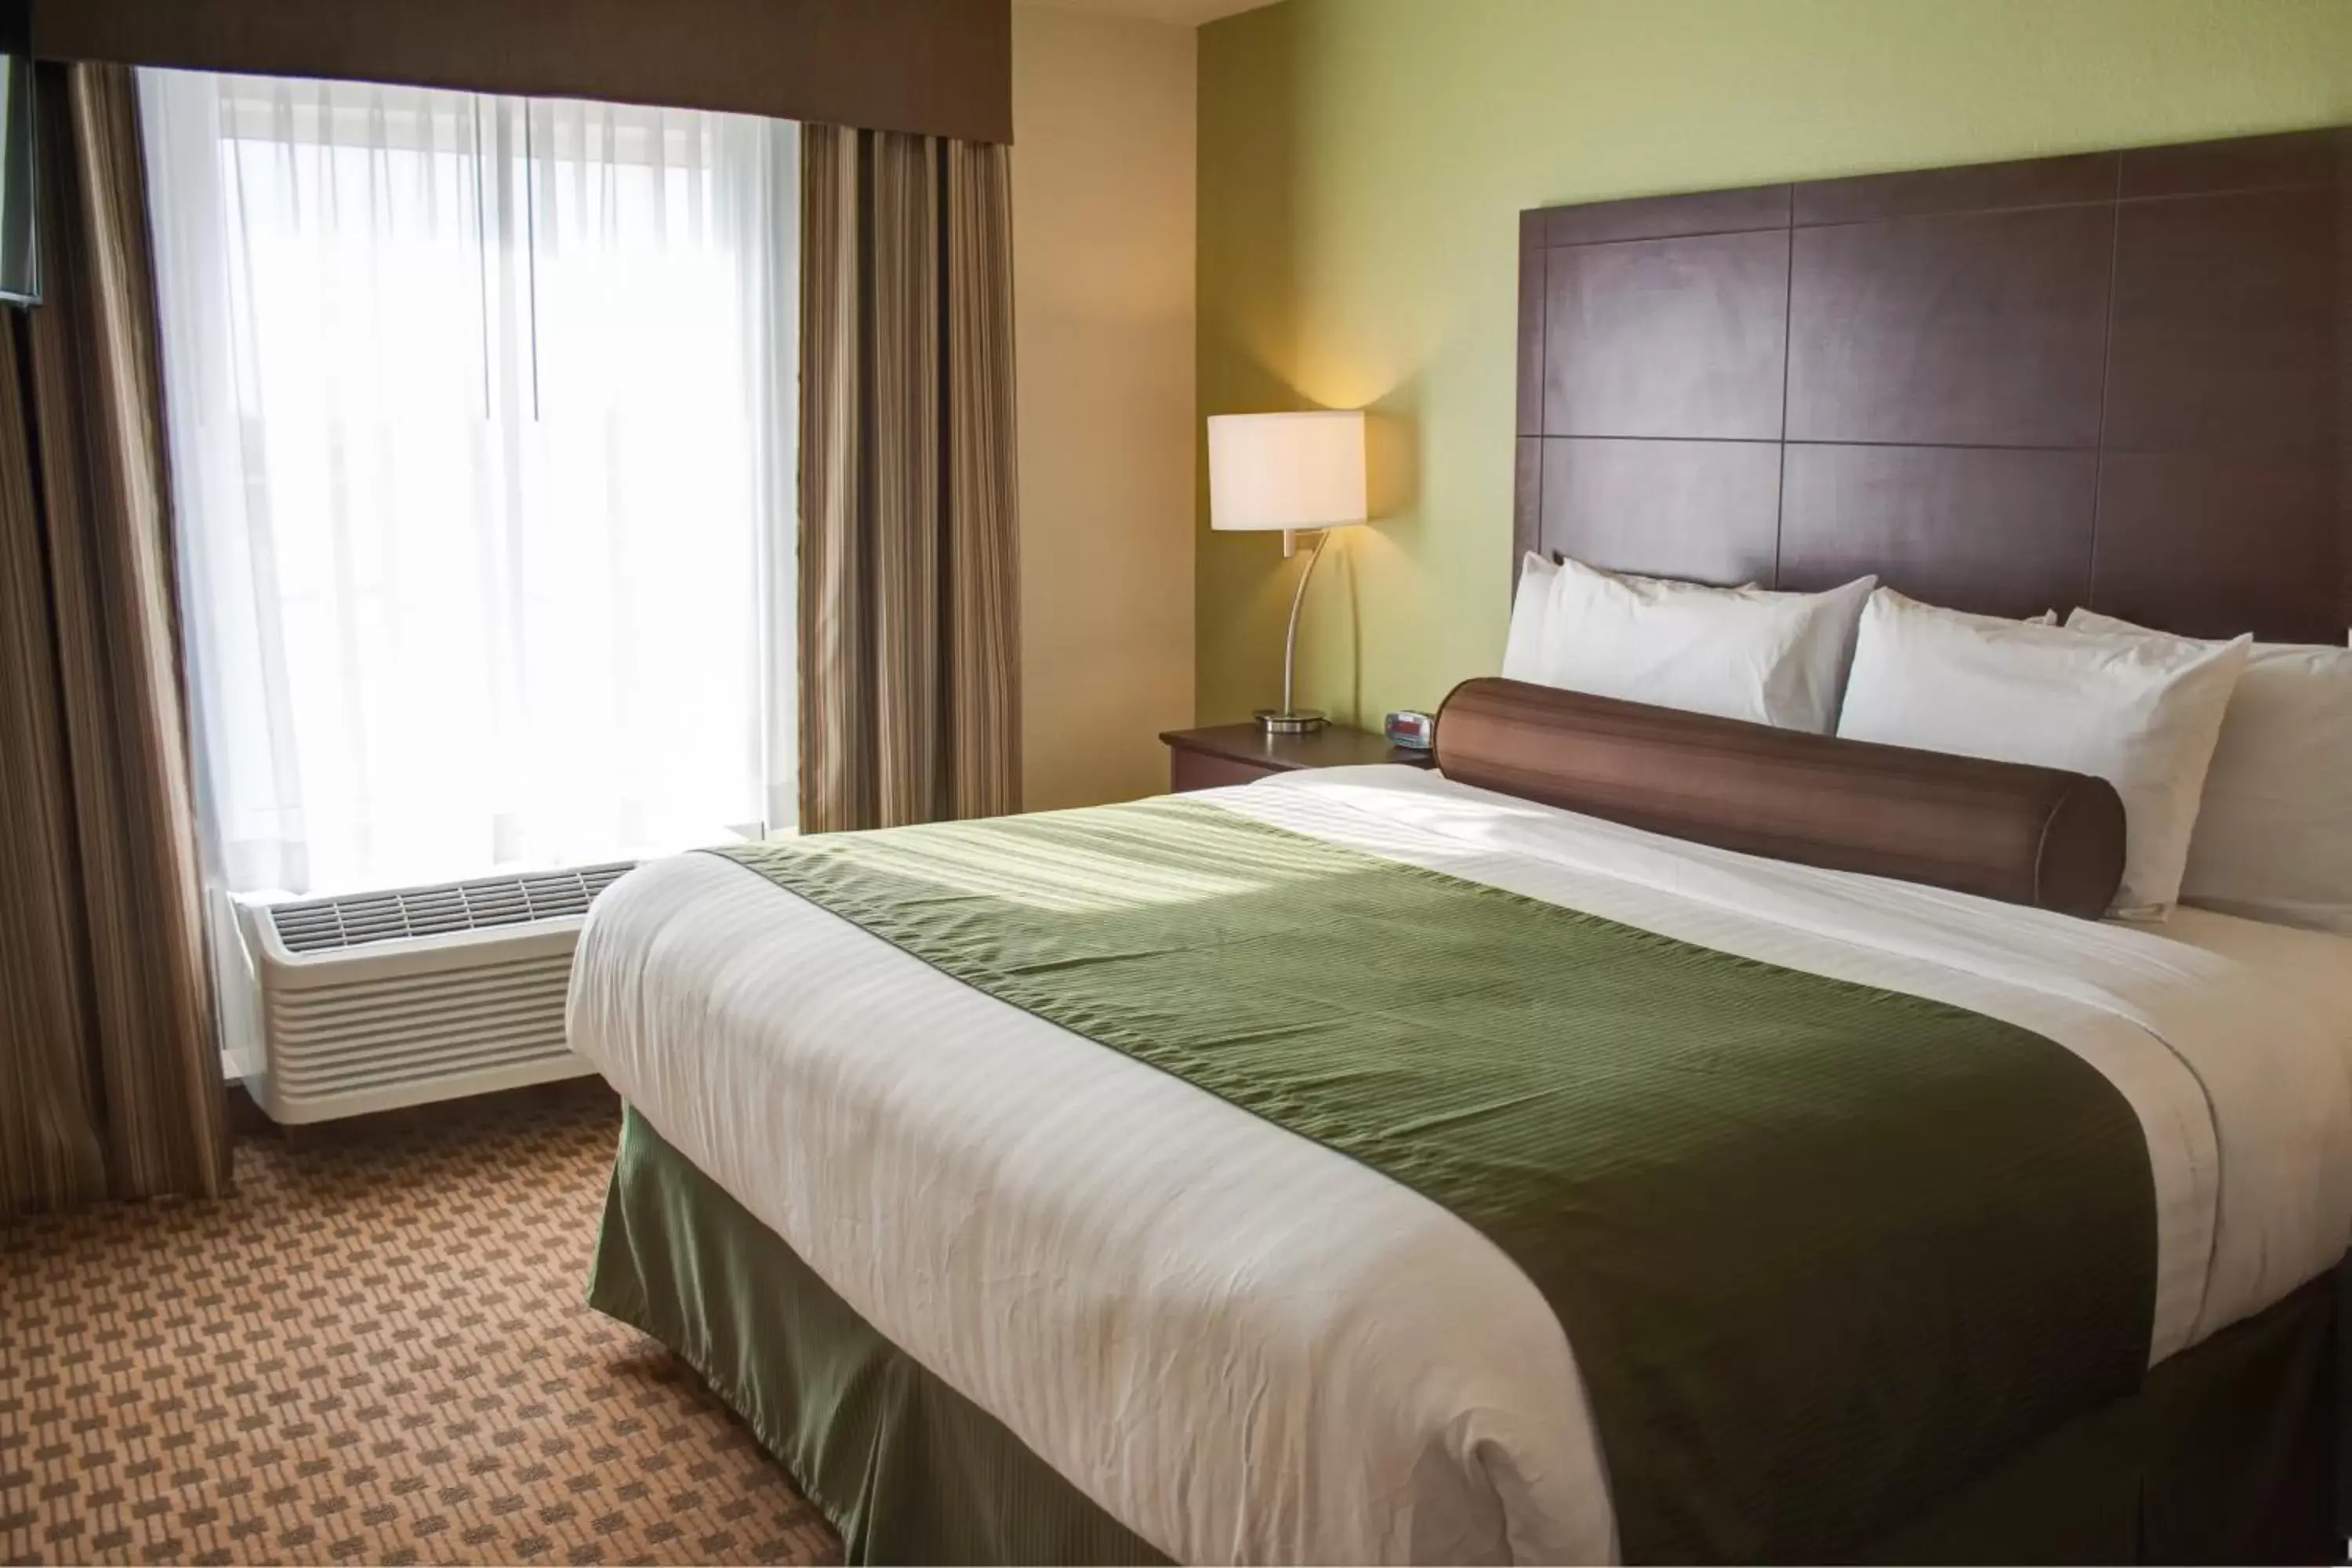 Deluxe King Room in Cobblestone Hotel and Suites - Jefferson